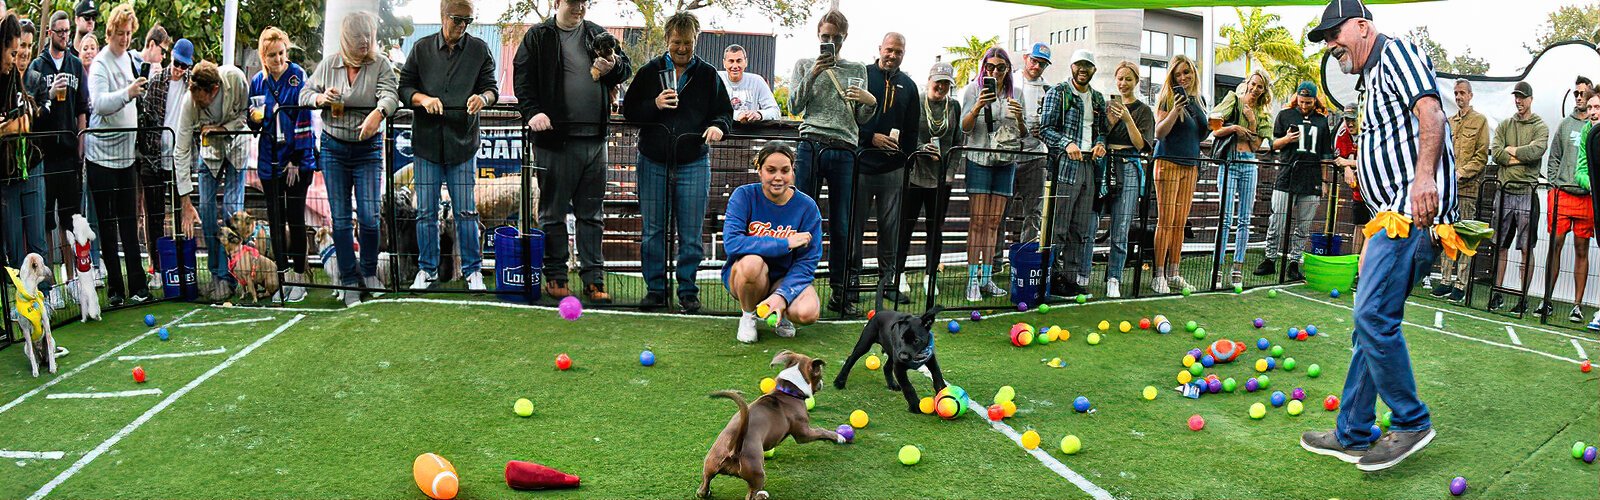 A “wooferee” officiates at the Woofball Puppy Bowl that recently took place at the Dog Bar in a fenced yard stocked with toys and balls for the pups to grab.